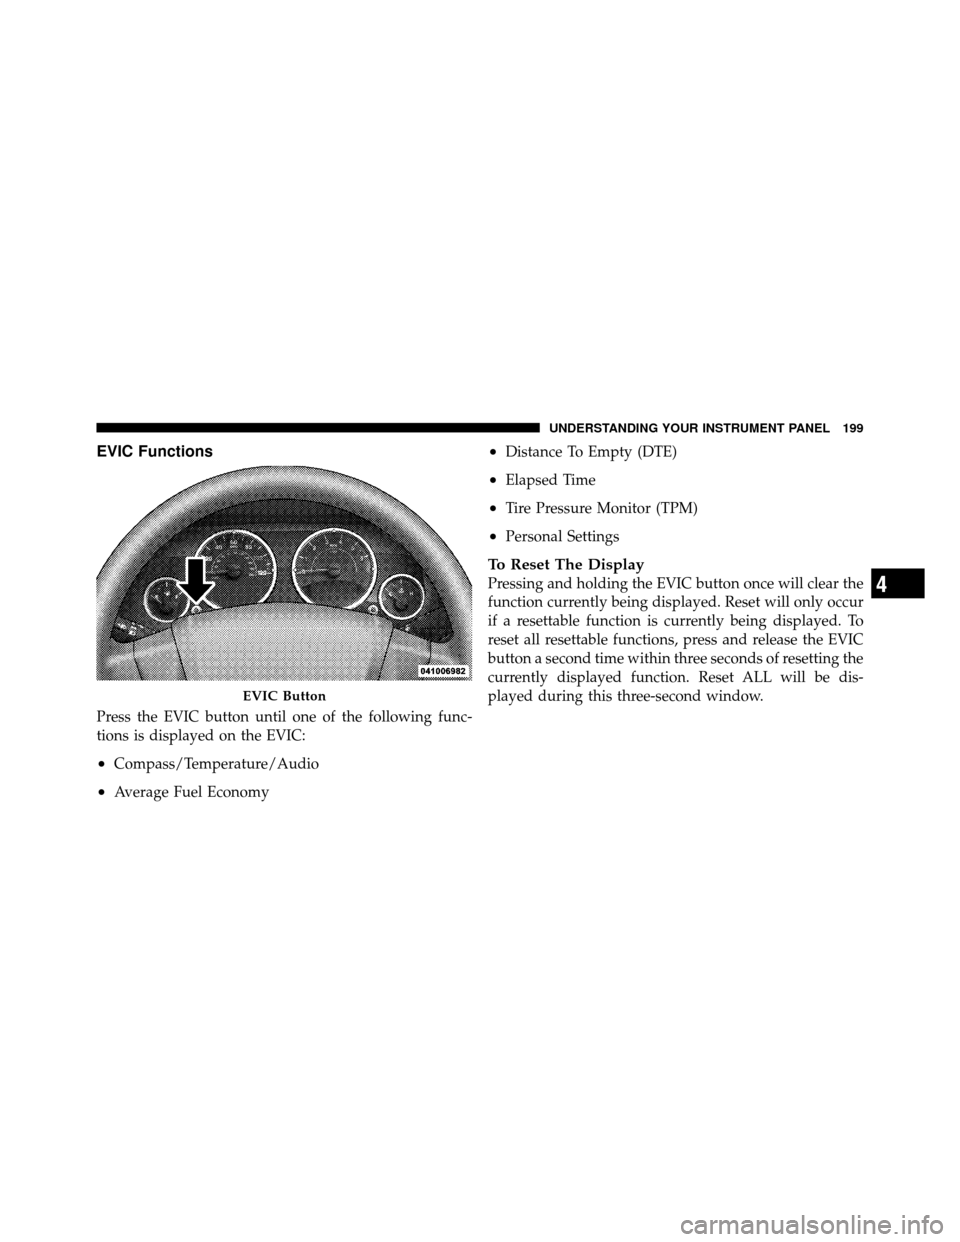 JEEP COMPASS 2010 1.G Owners Manual EVIC Functions
Press the EVIC button until one of the following func-
tions is displayed on the EVIC:
•Compass/Temperature/Audio
•Average Fuel Economy
•Distance To Empty (DTE)
•Elapsed Time
�